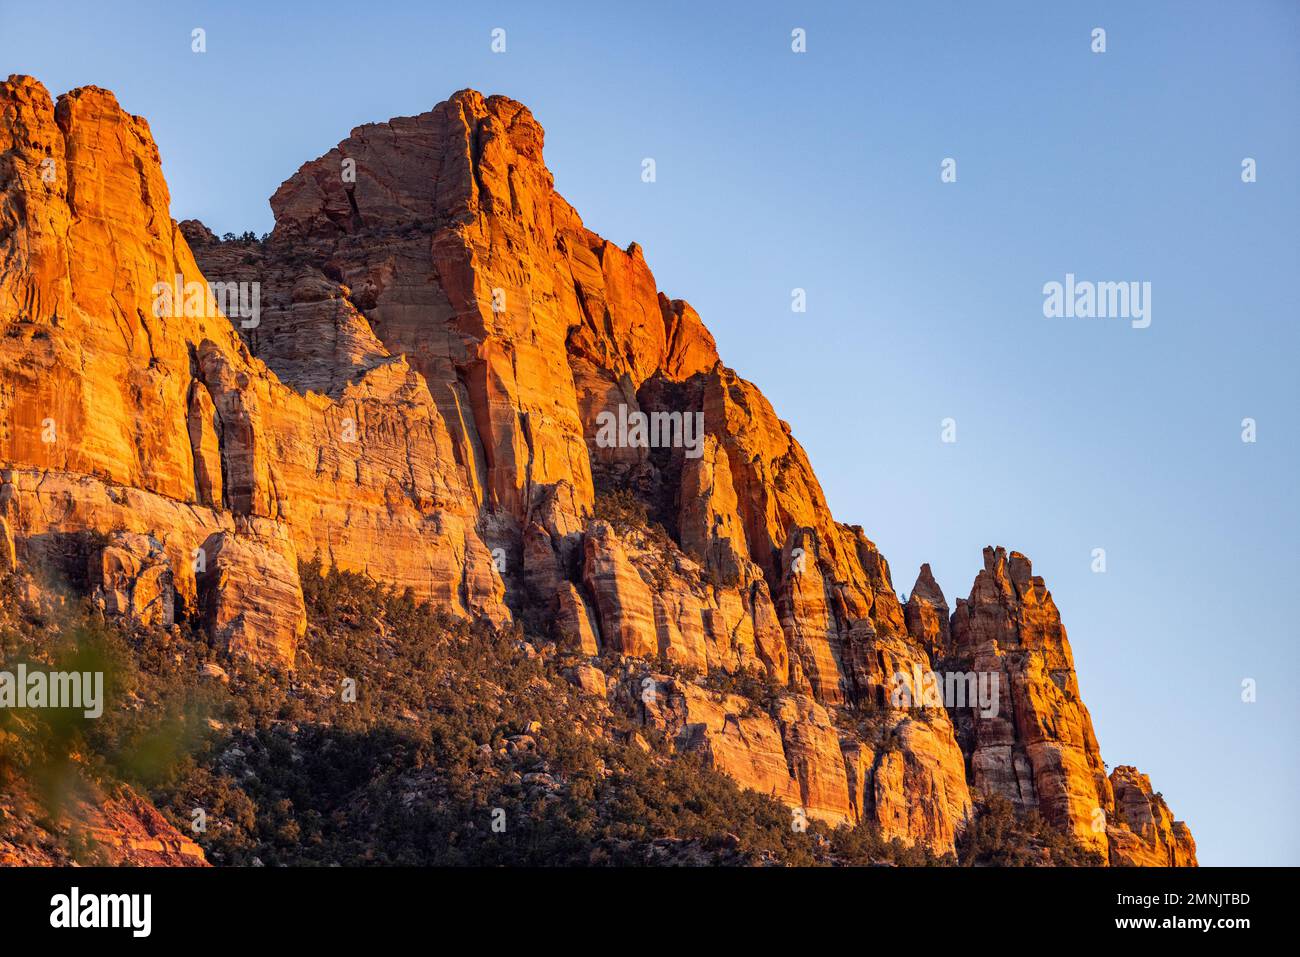 USA, Utah, Springdale, Red cliffs at sunset in Zion National Park Stock Photo